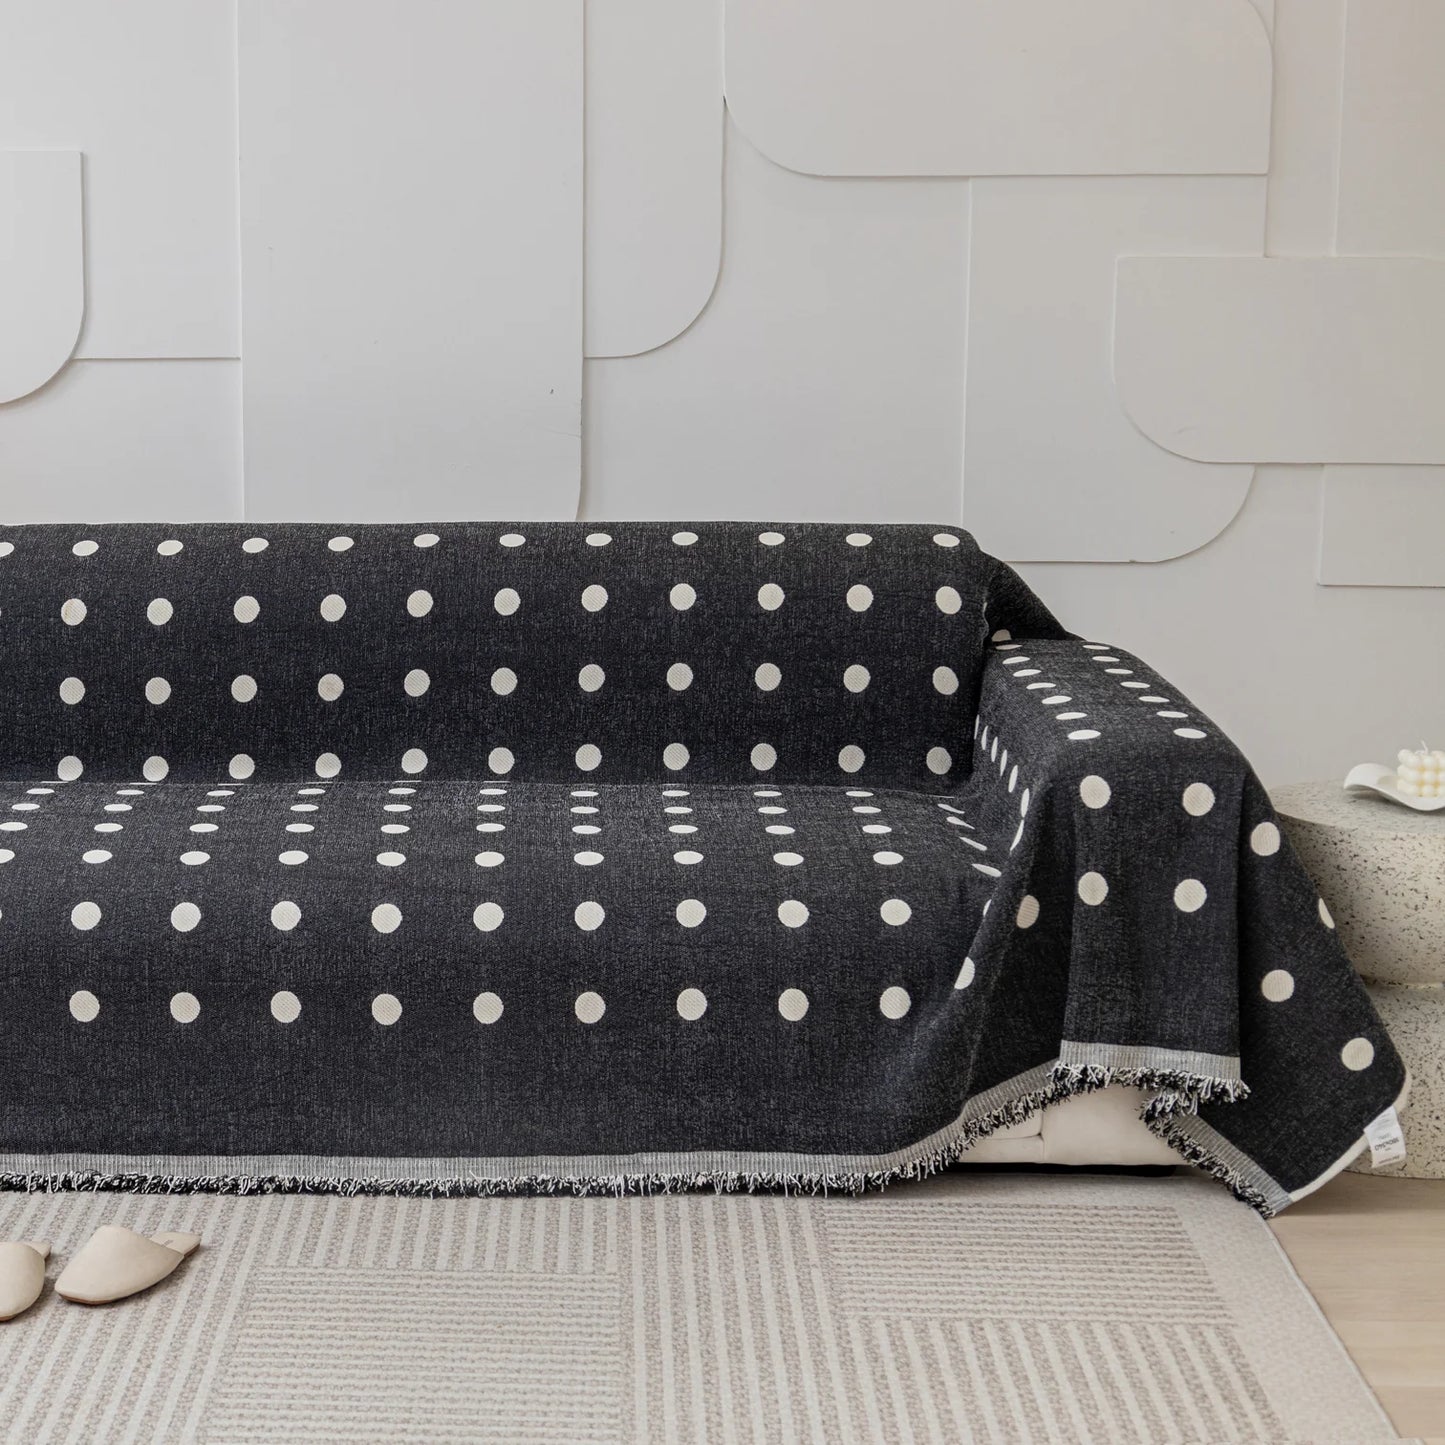 Black Boba Reversible Comfort Sofa / Couch Cover - Final Sale